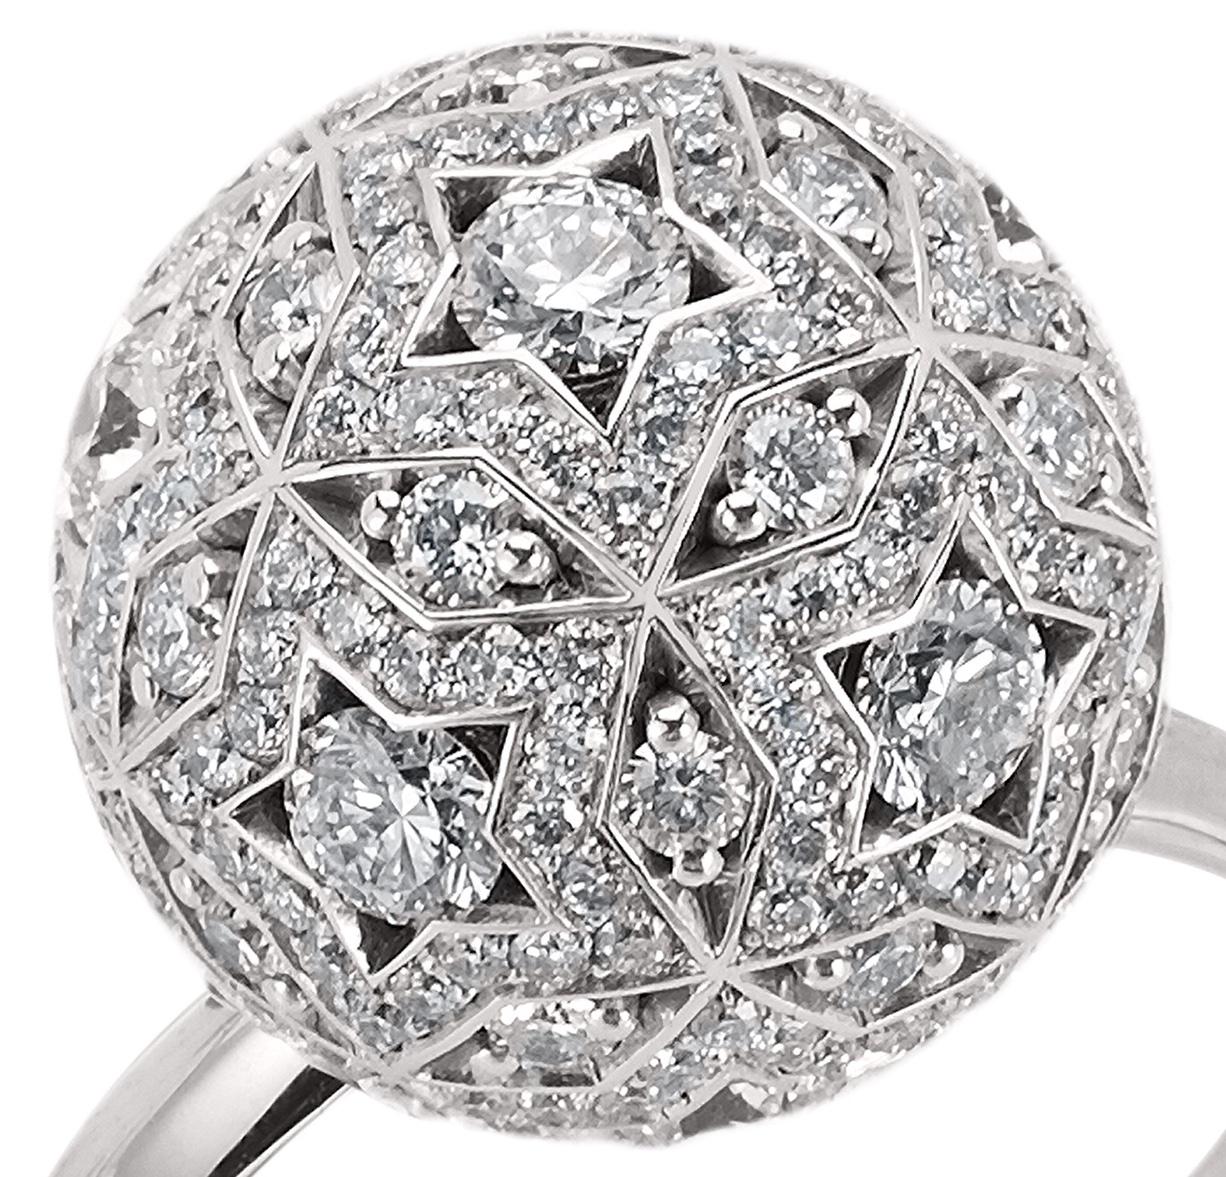 A unique ring design inspired by the constellations of the night sky and created with Hirsh Celestial Movement.

- 256 round cut diamonds weighing approx. 2.15 carat in total
- Created in 18K white gold with 28 hidden ruby jewel spheres

This